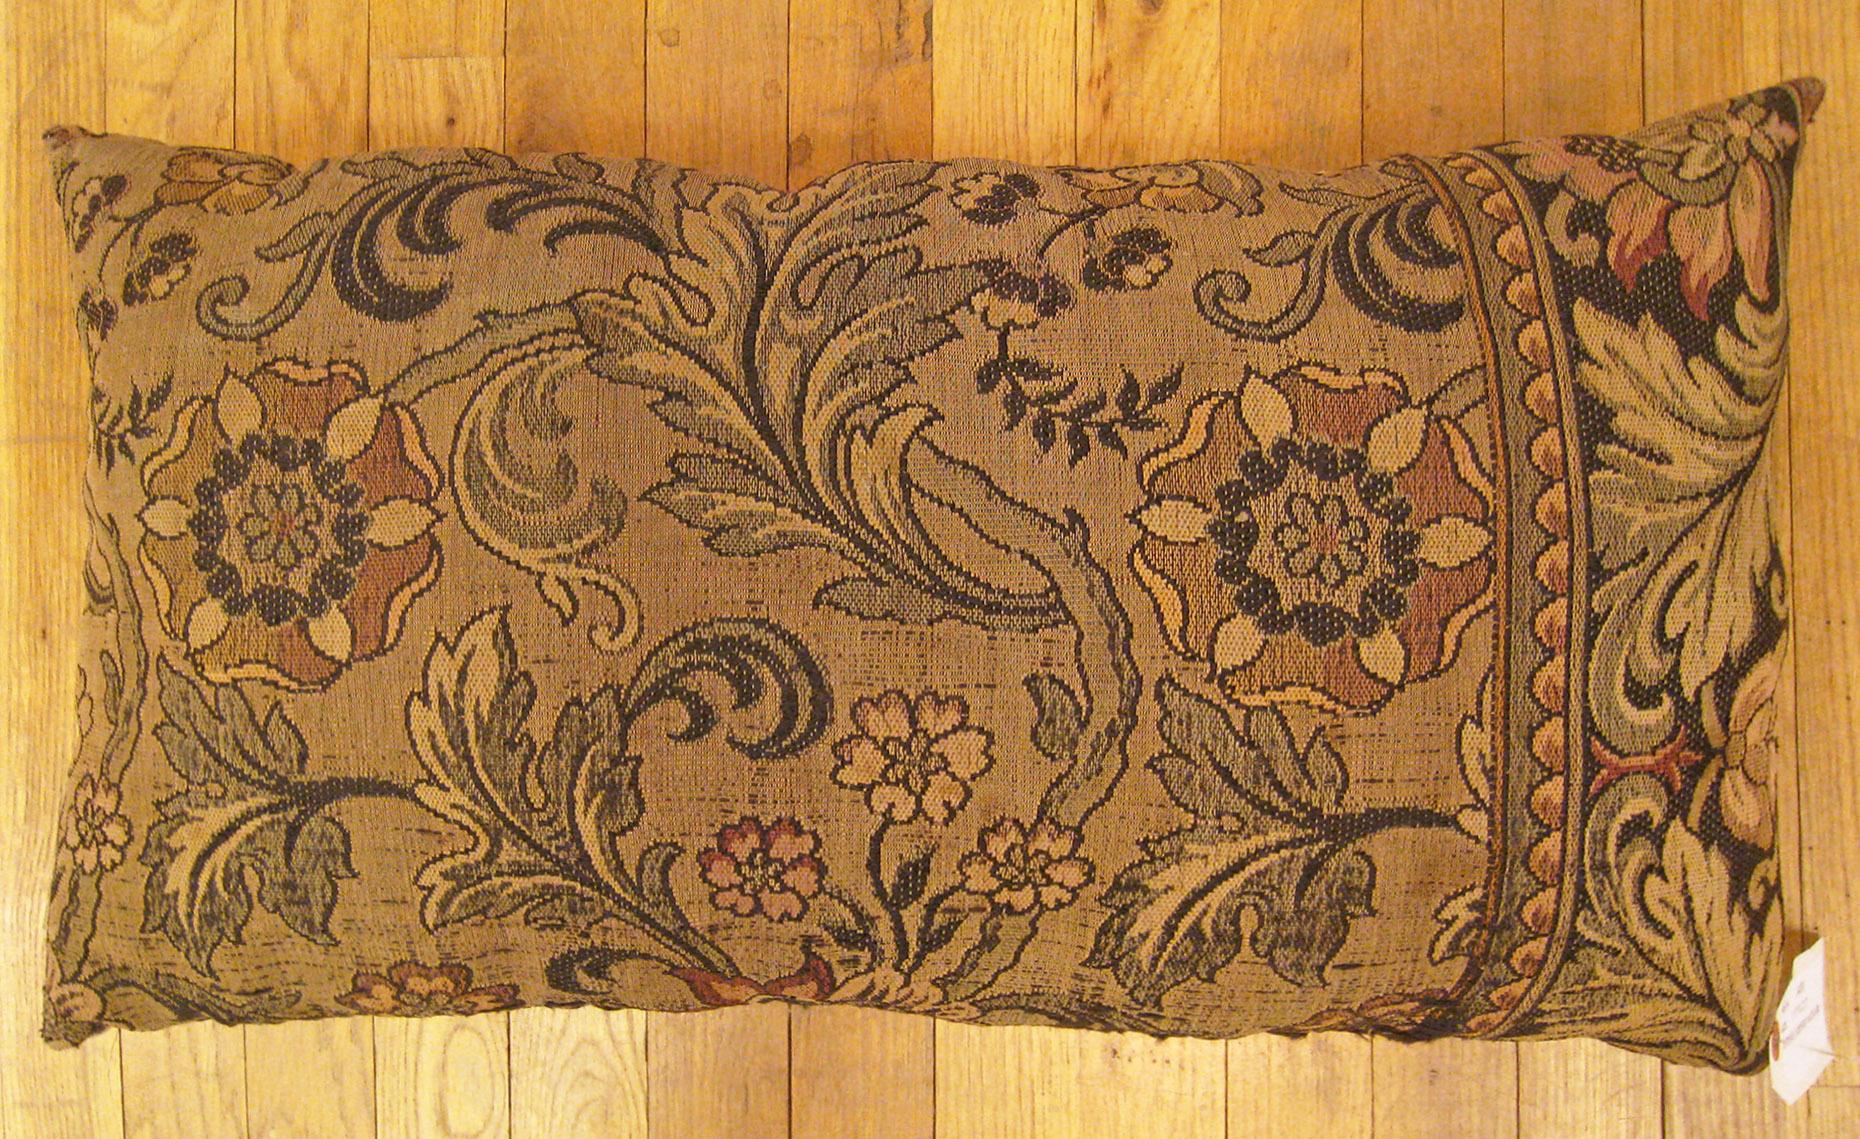 Antique Jacquard Tapestry Pillow; size 1'3” x 2'2”.

An antique decorative pillow with floral elements allover a brown central field, size 1'3